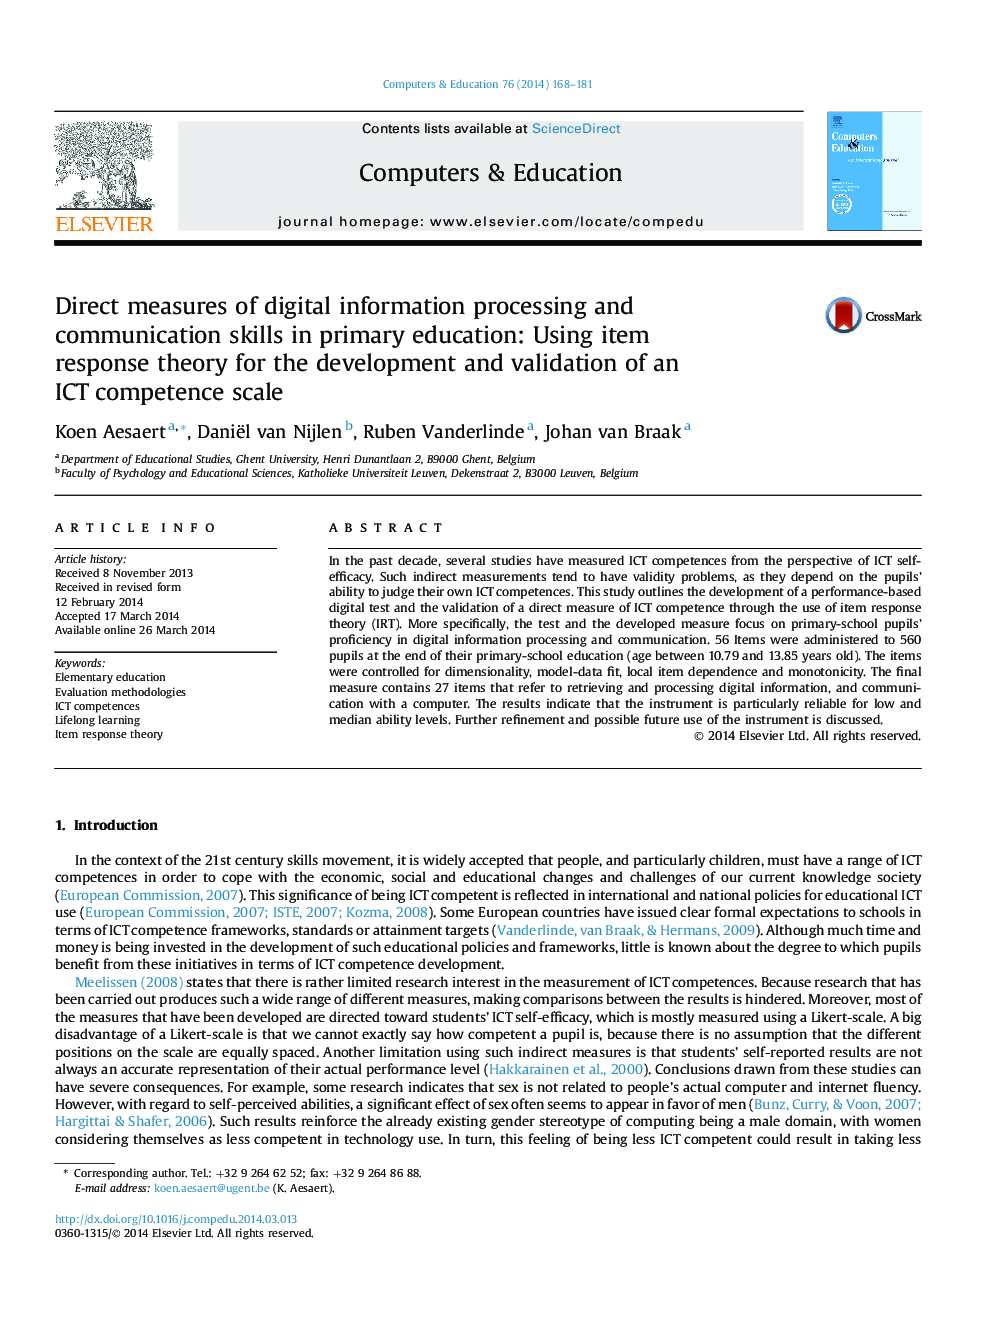 Direct measures of digital information processing and communication skills in primary education: Using item response theory for the development and validation of an ICT competence scale